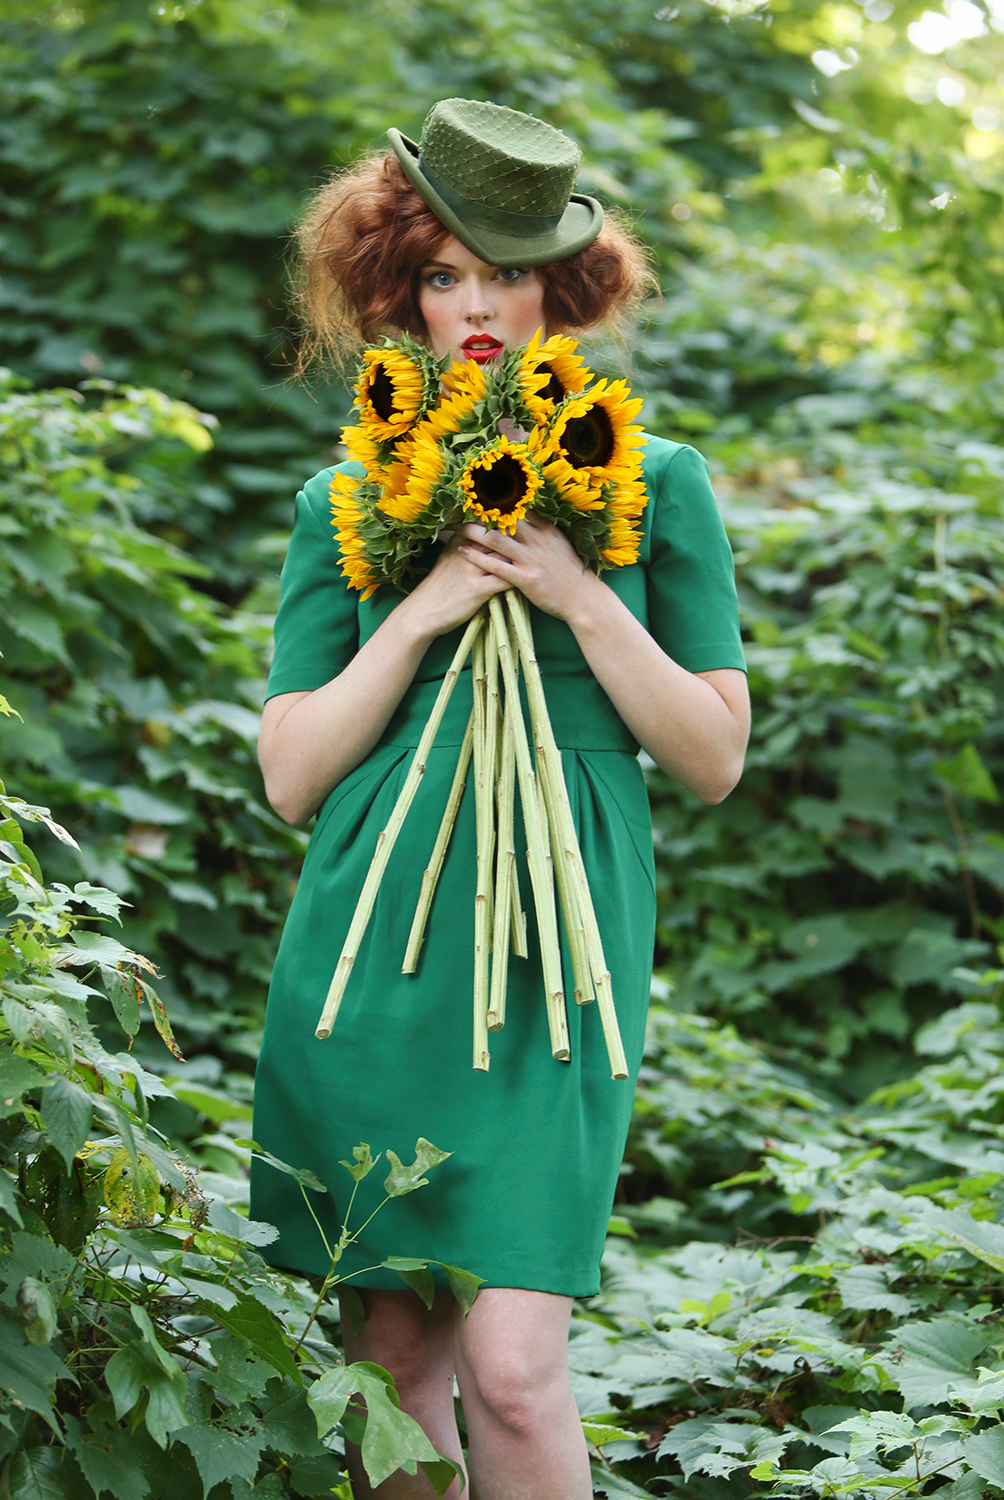 model-with-sunflowers-green-dress-fashion-photographer-cleveland.jpg